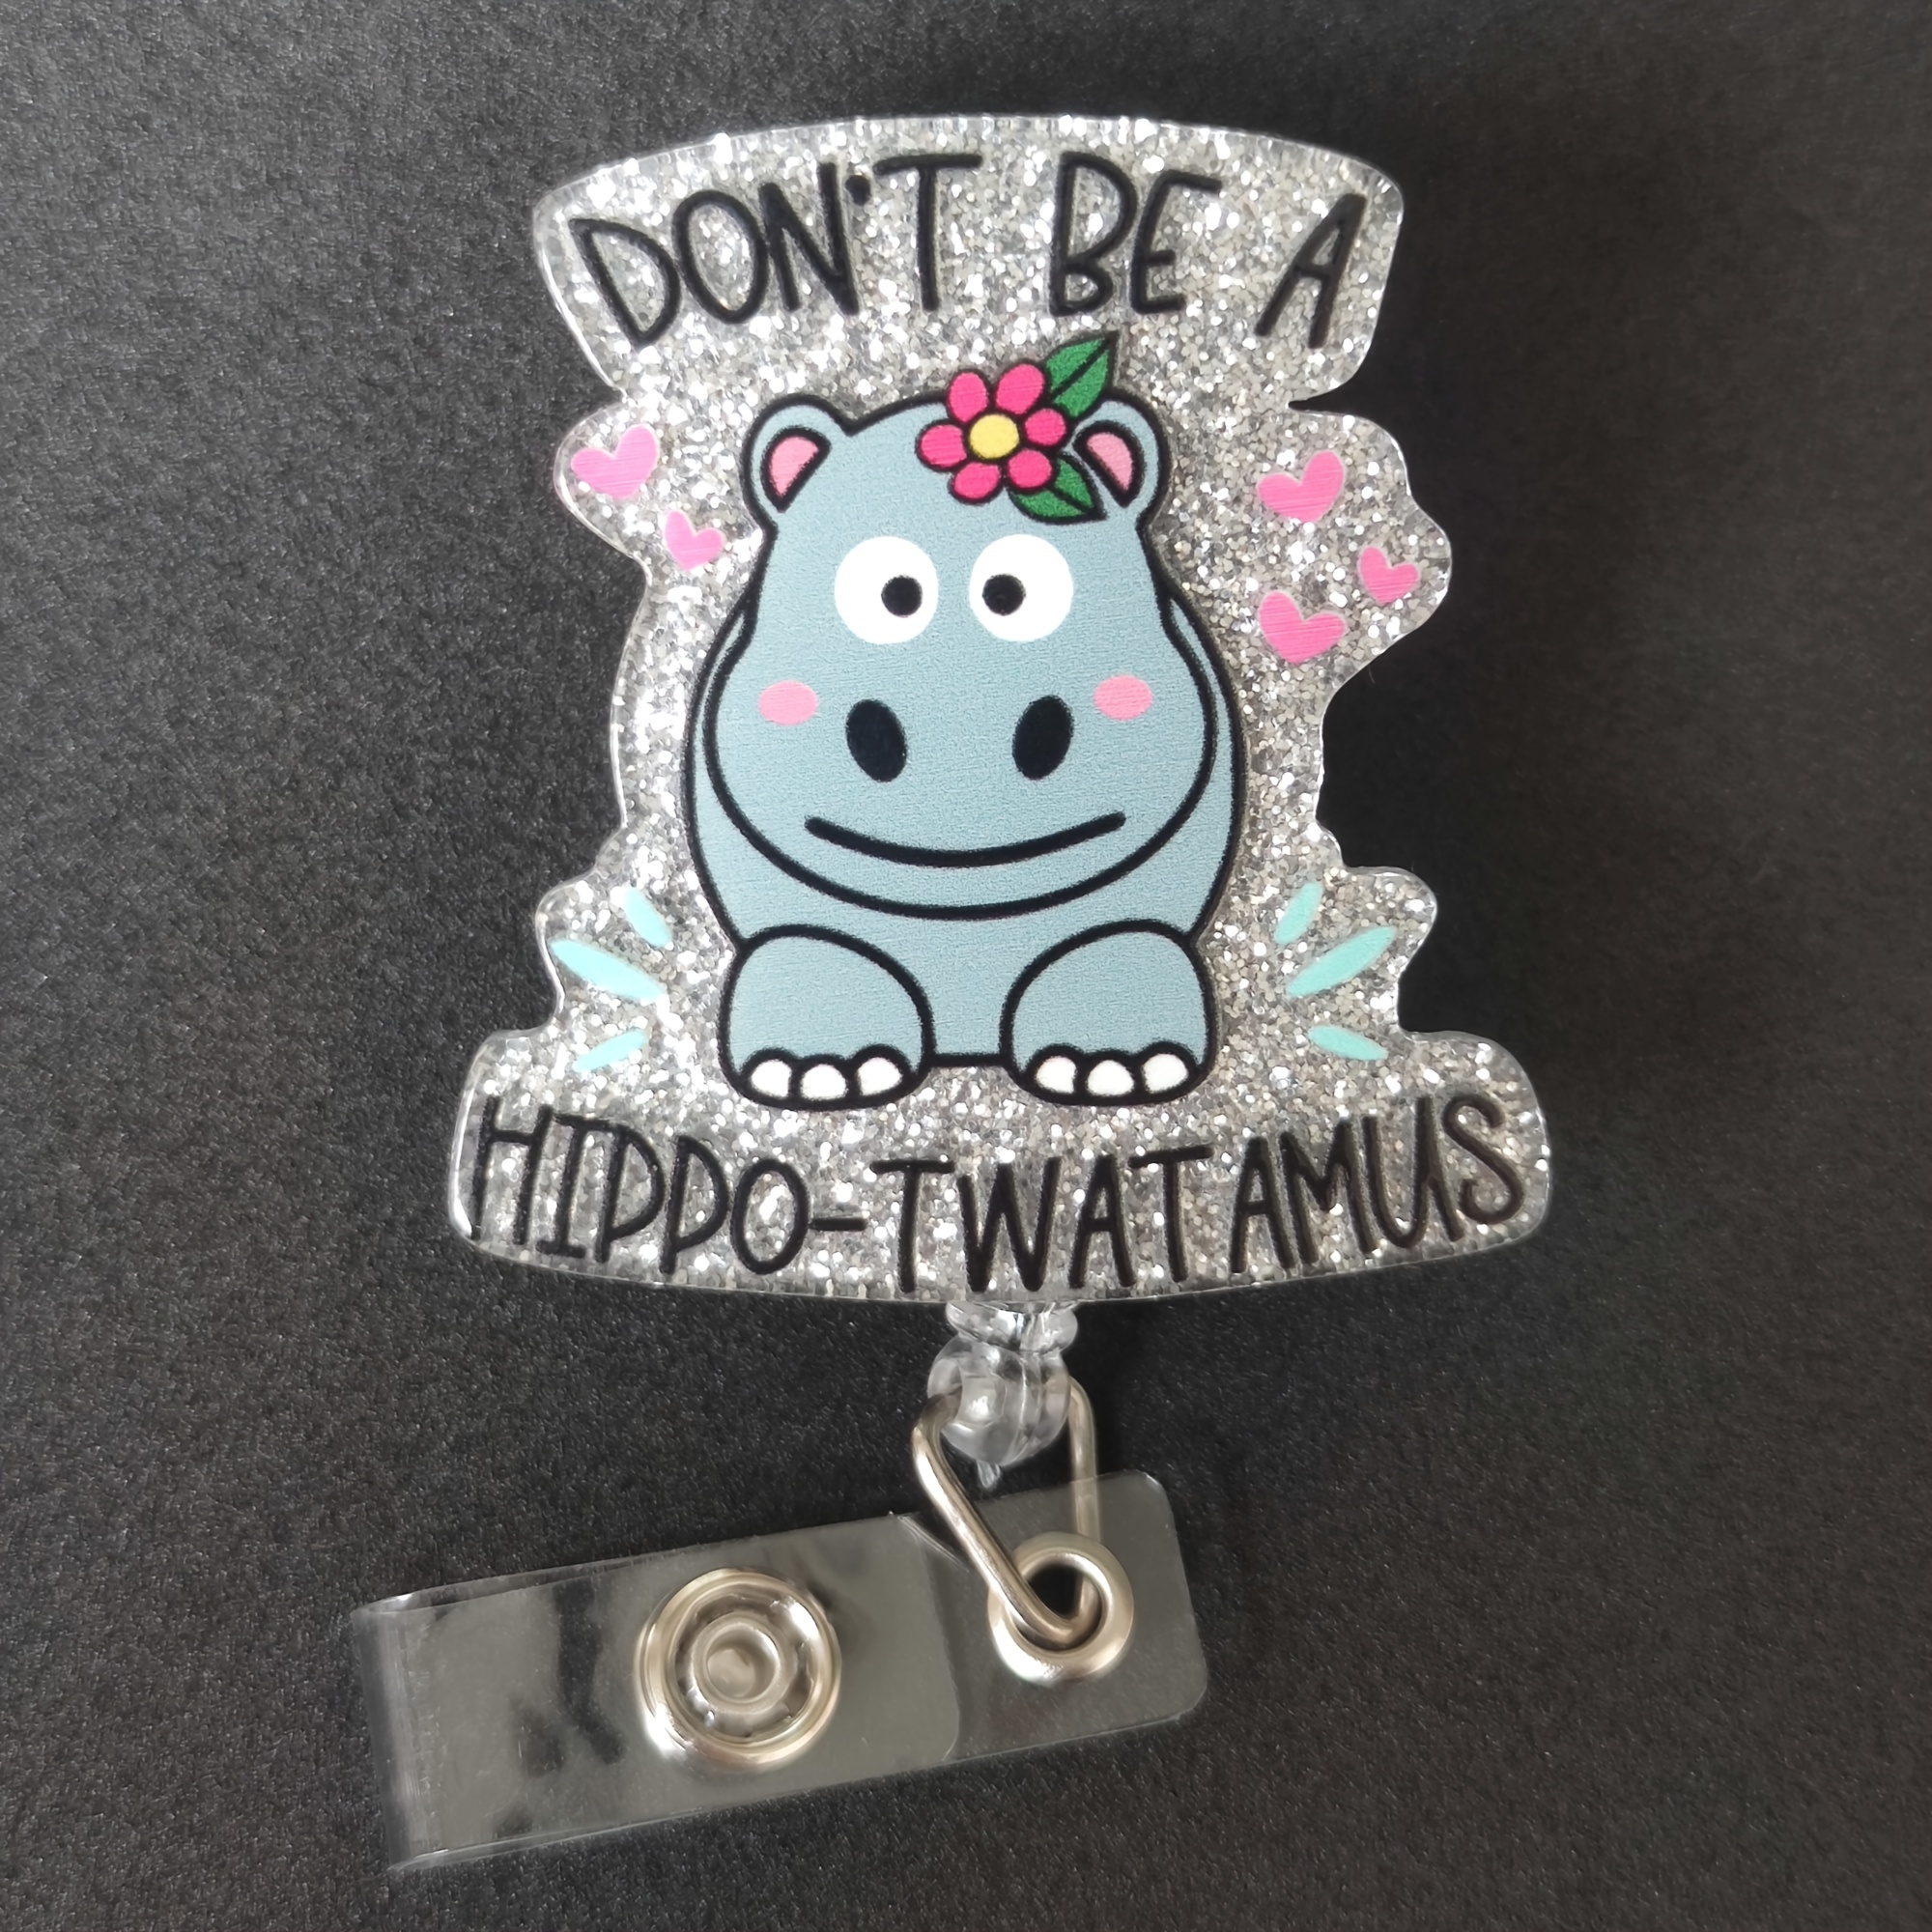 1pc Don't Be A Hippo-Twatamus Retractable Badge Reel With Clip, Cute Hippo  ID Card Badge Holder Gift For Nurses Doctors Office Worker Social Worker Co